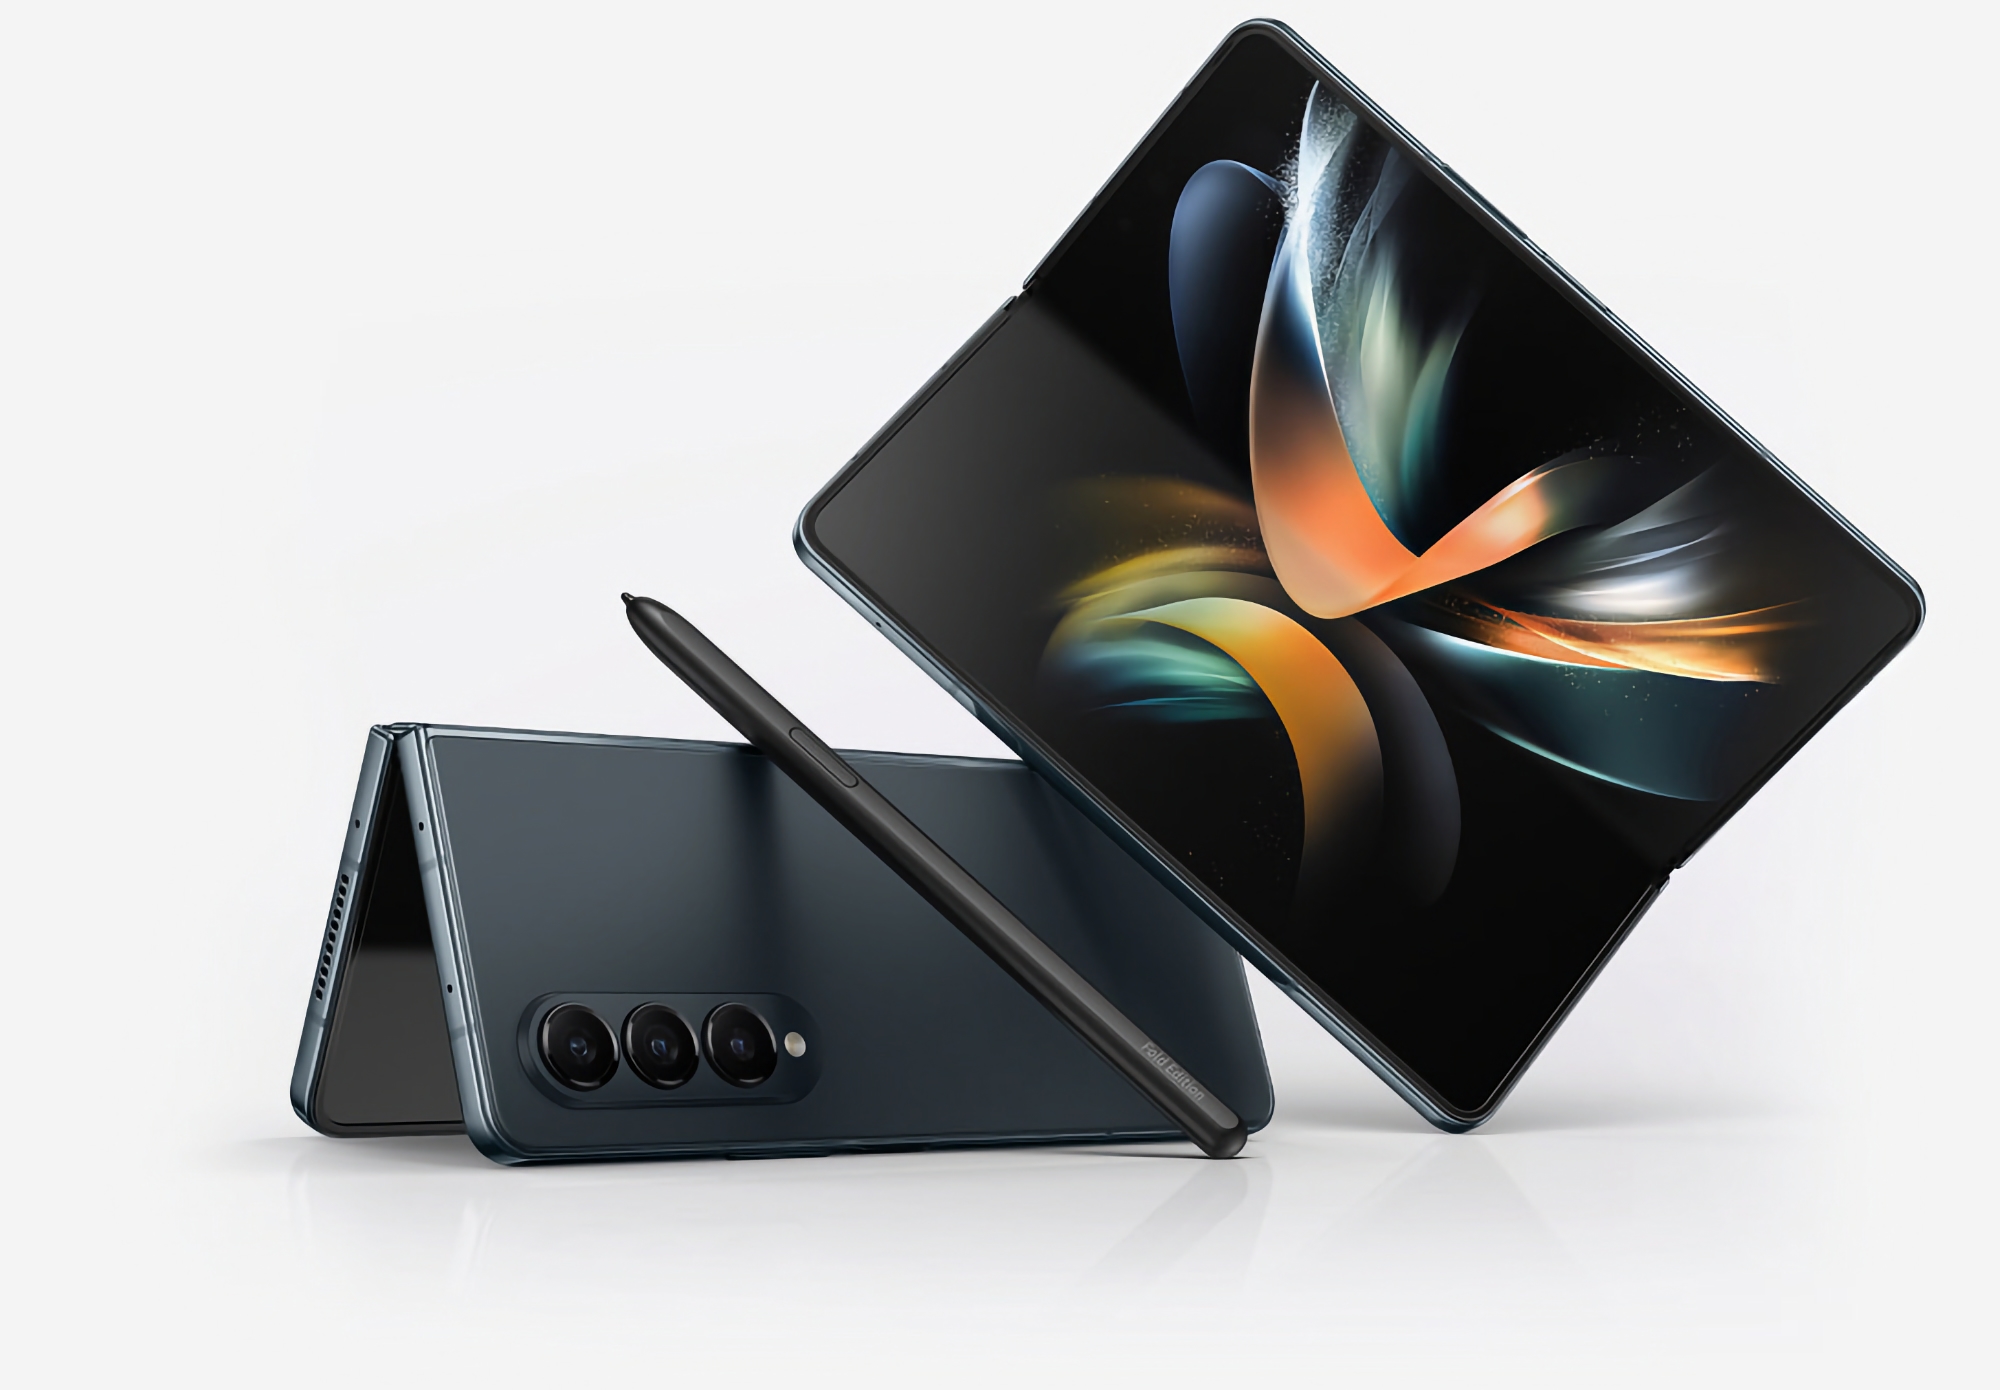 The Samsung Galaxy Fold 4 is available for $450 off on Amazon